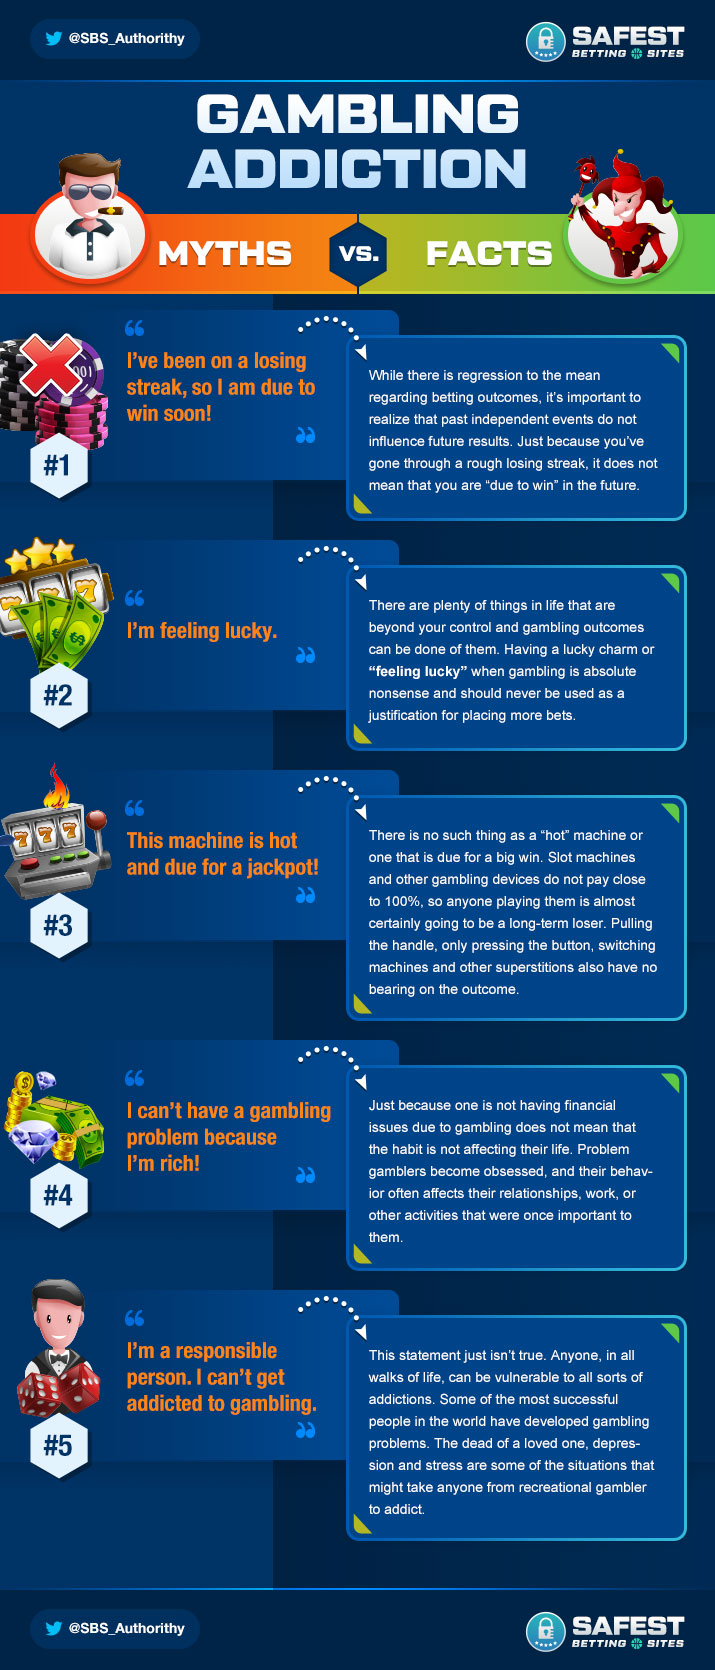 Gambling Addiction Myths Vs Facts Infographic 2019